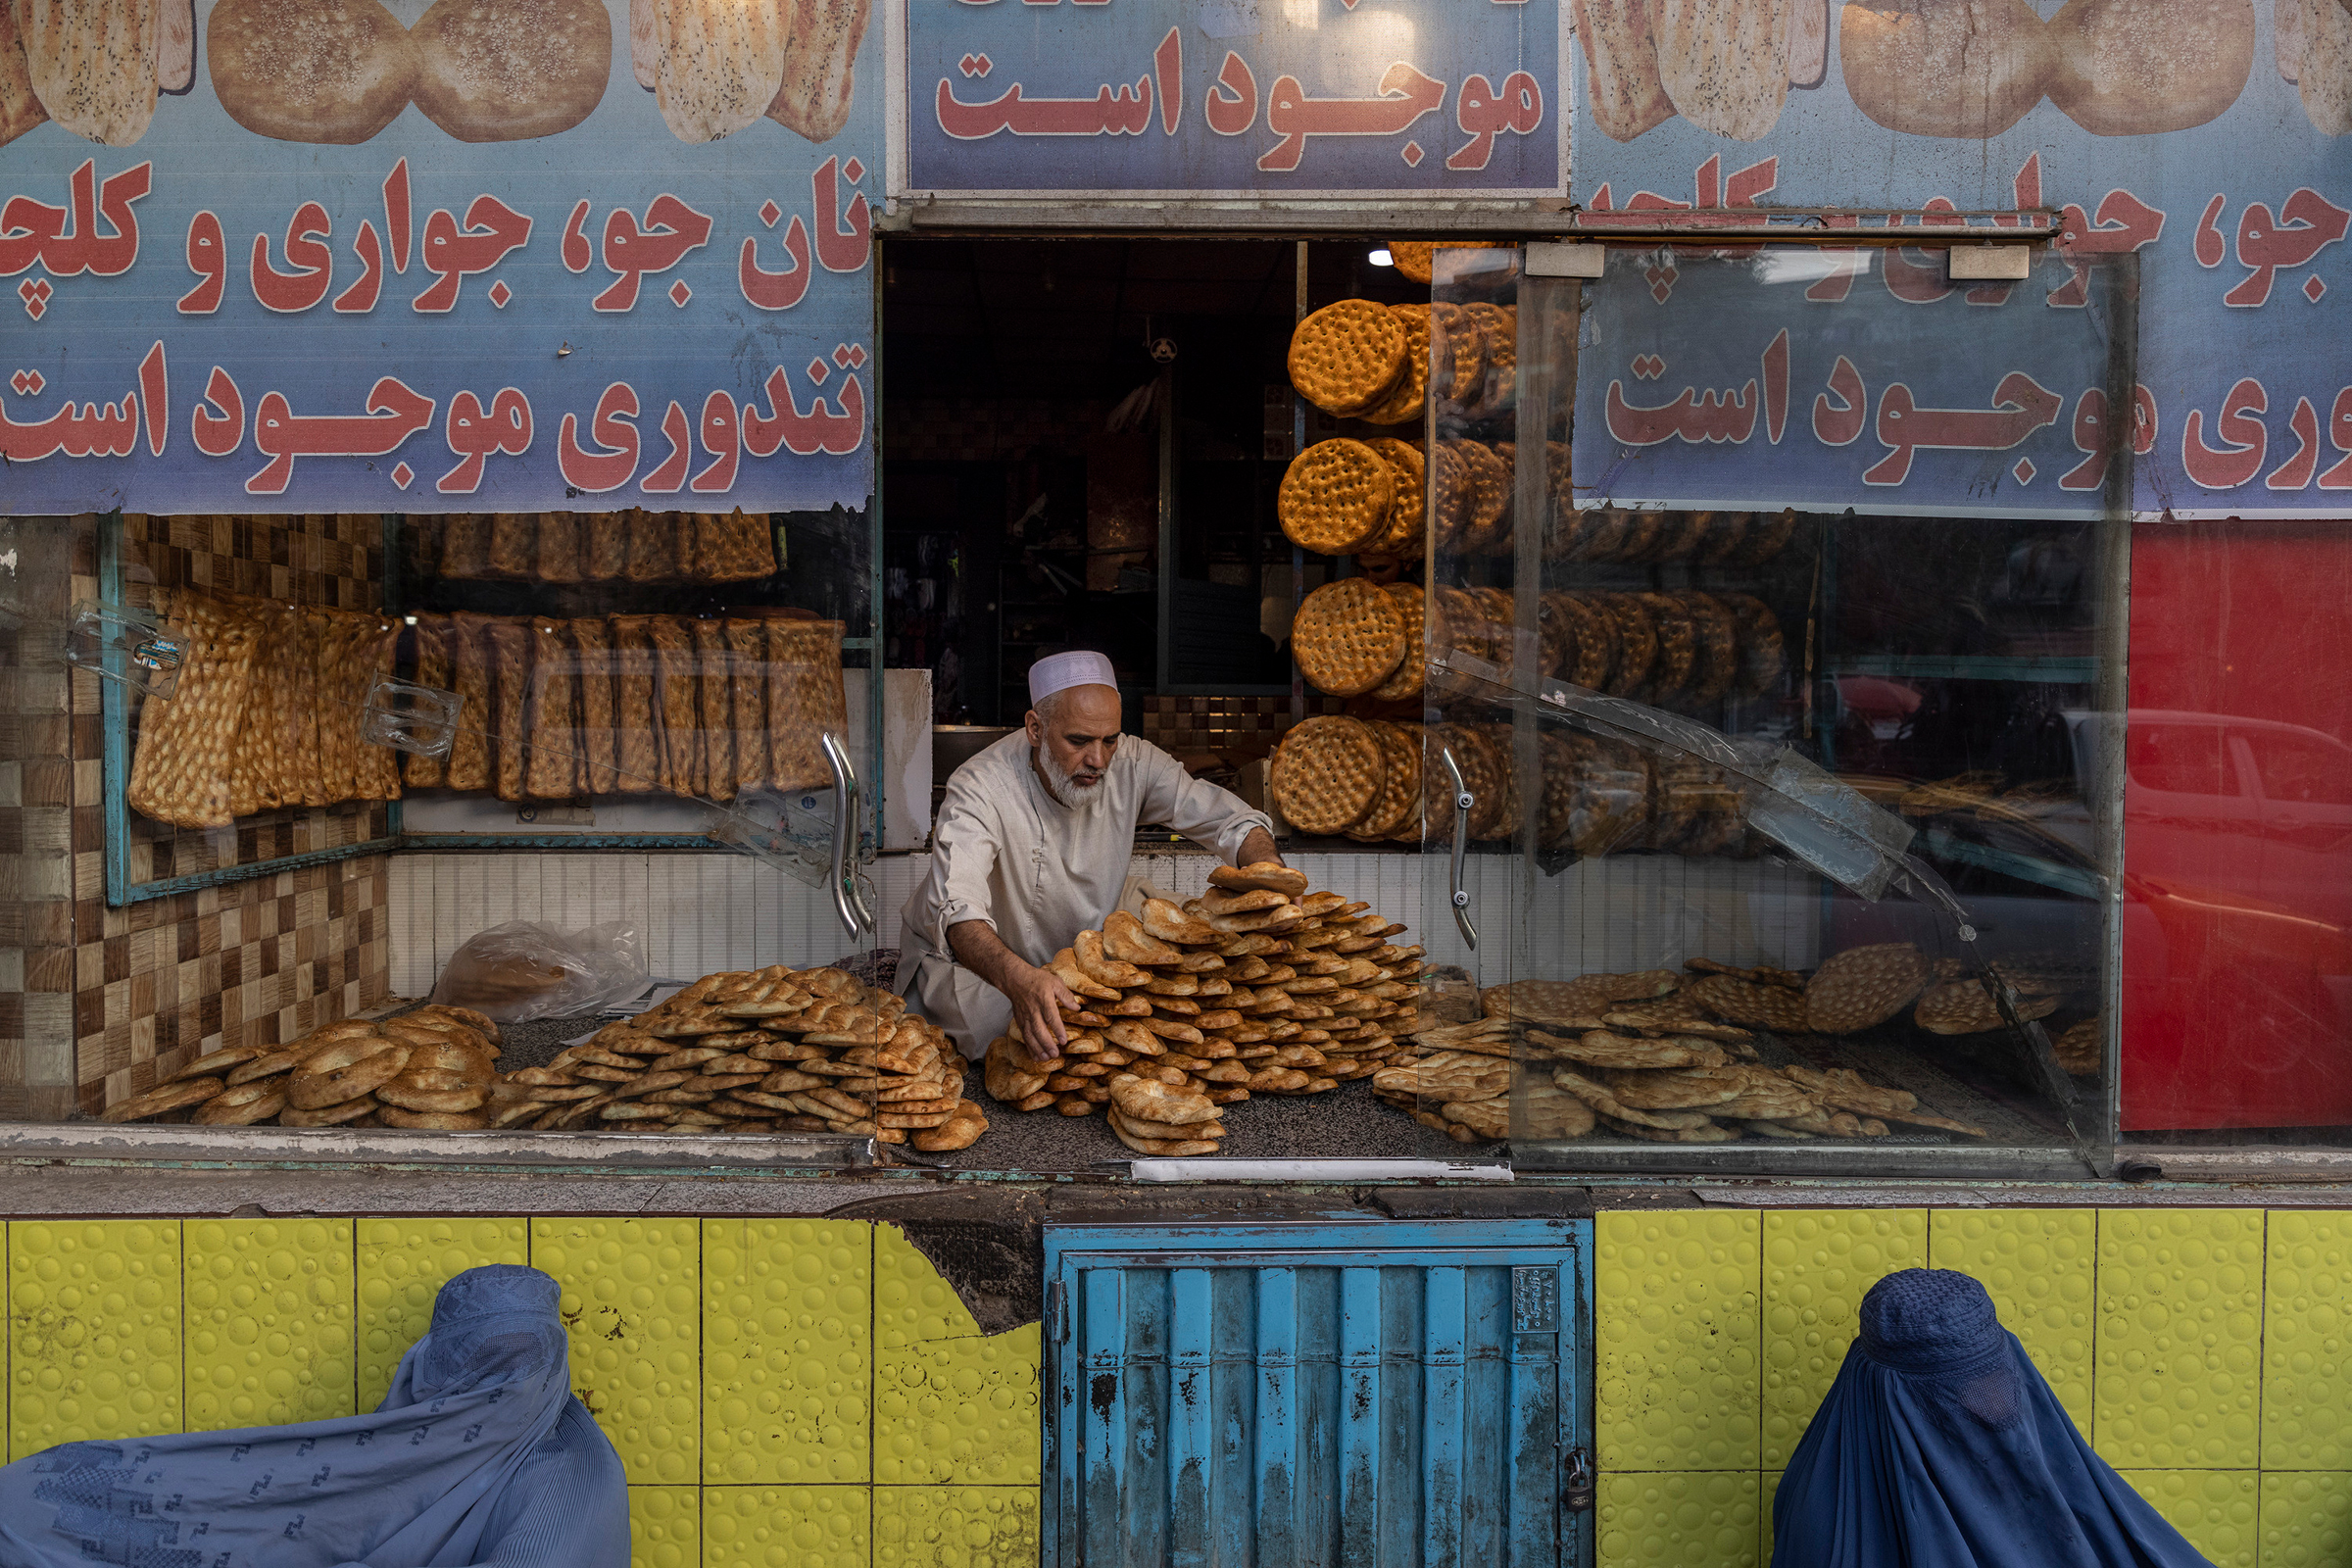 Two women beg for alms outside a bakery in Kabul on Sept. 13, 2021.